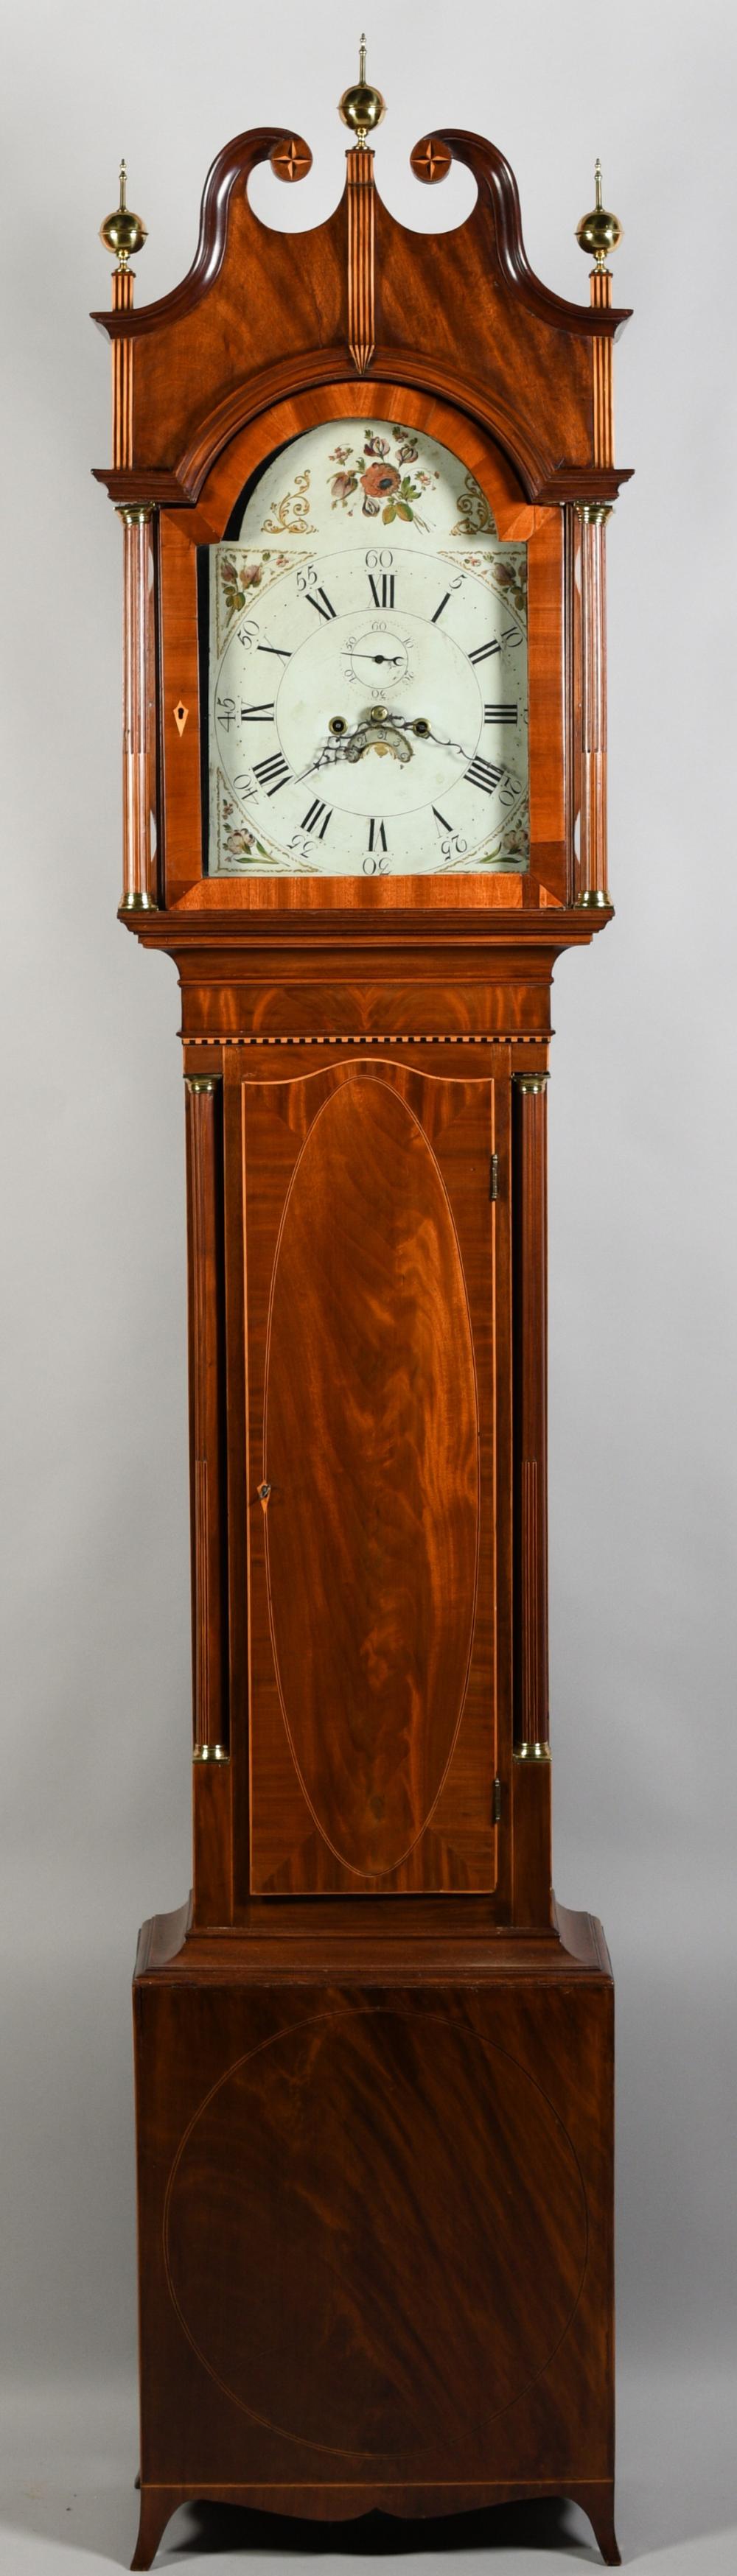 CHIPPENDALE INLAID MAHOGANY TALL